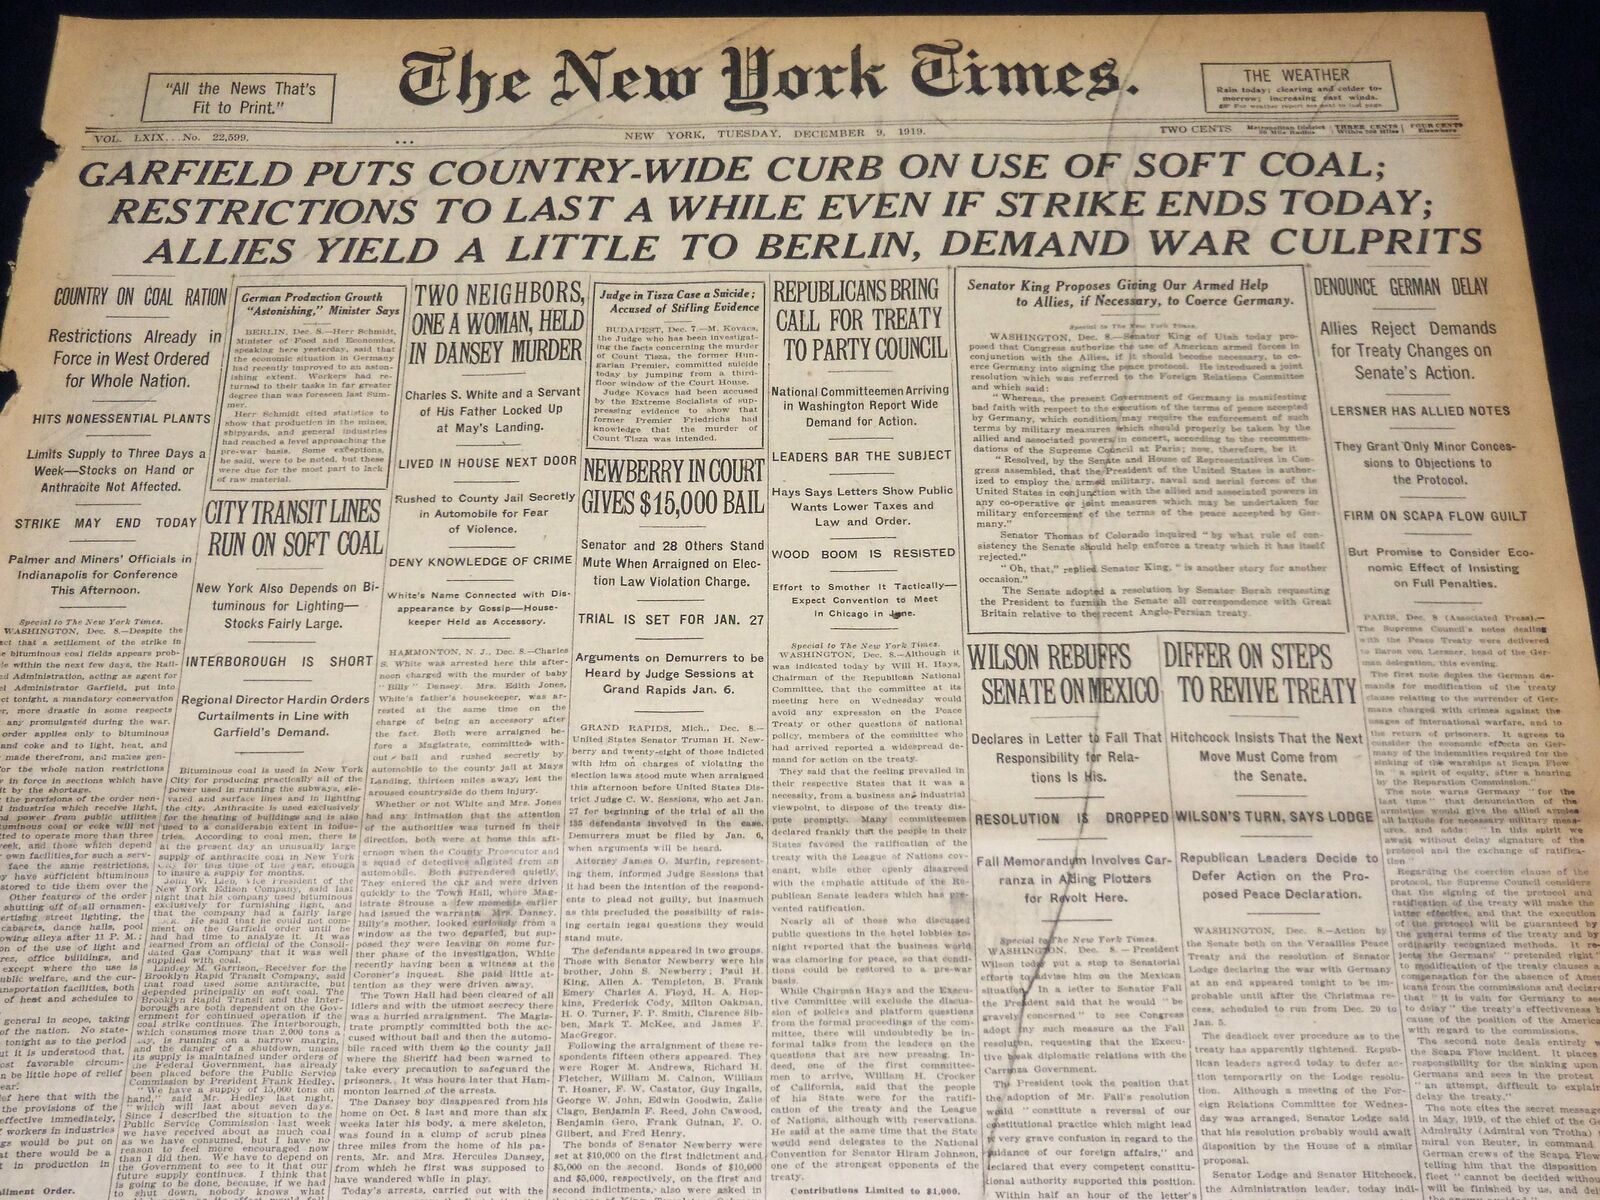 1919 DECEMBER 9 NEW YORK TIMES - COUNTRY WIDE CURB ON SOFT COAL - NT 7950